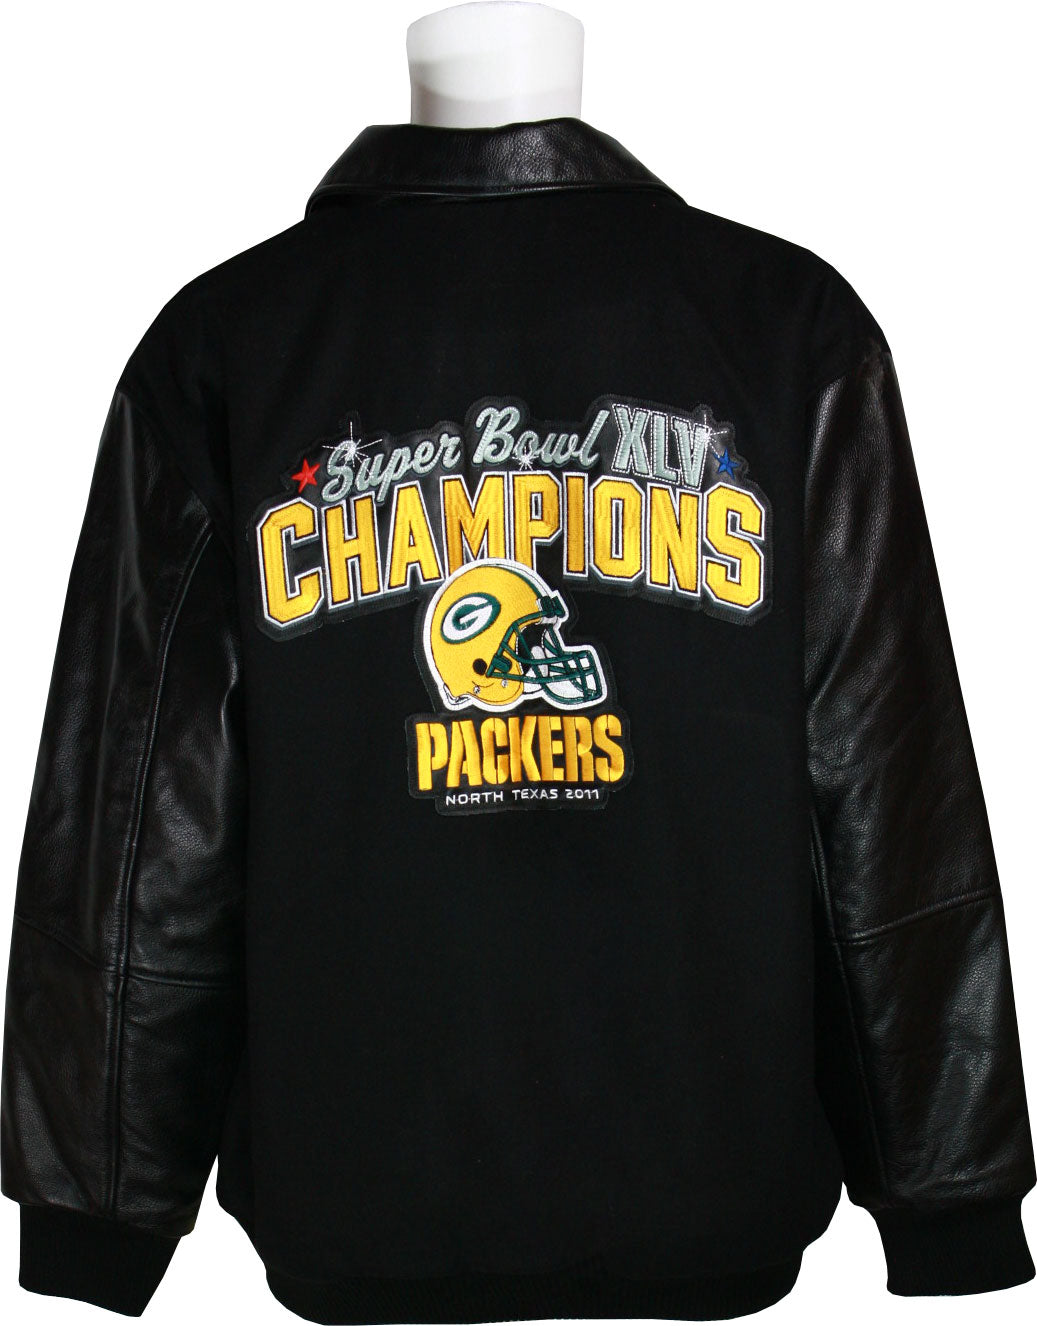 Maker of Jacket NFL Green Bay Packers Wool Leather